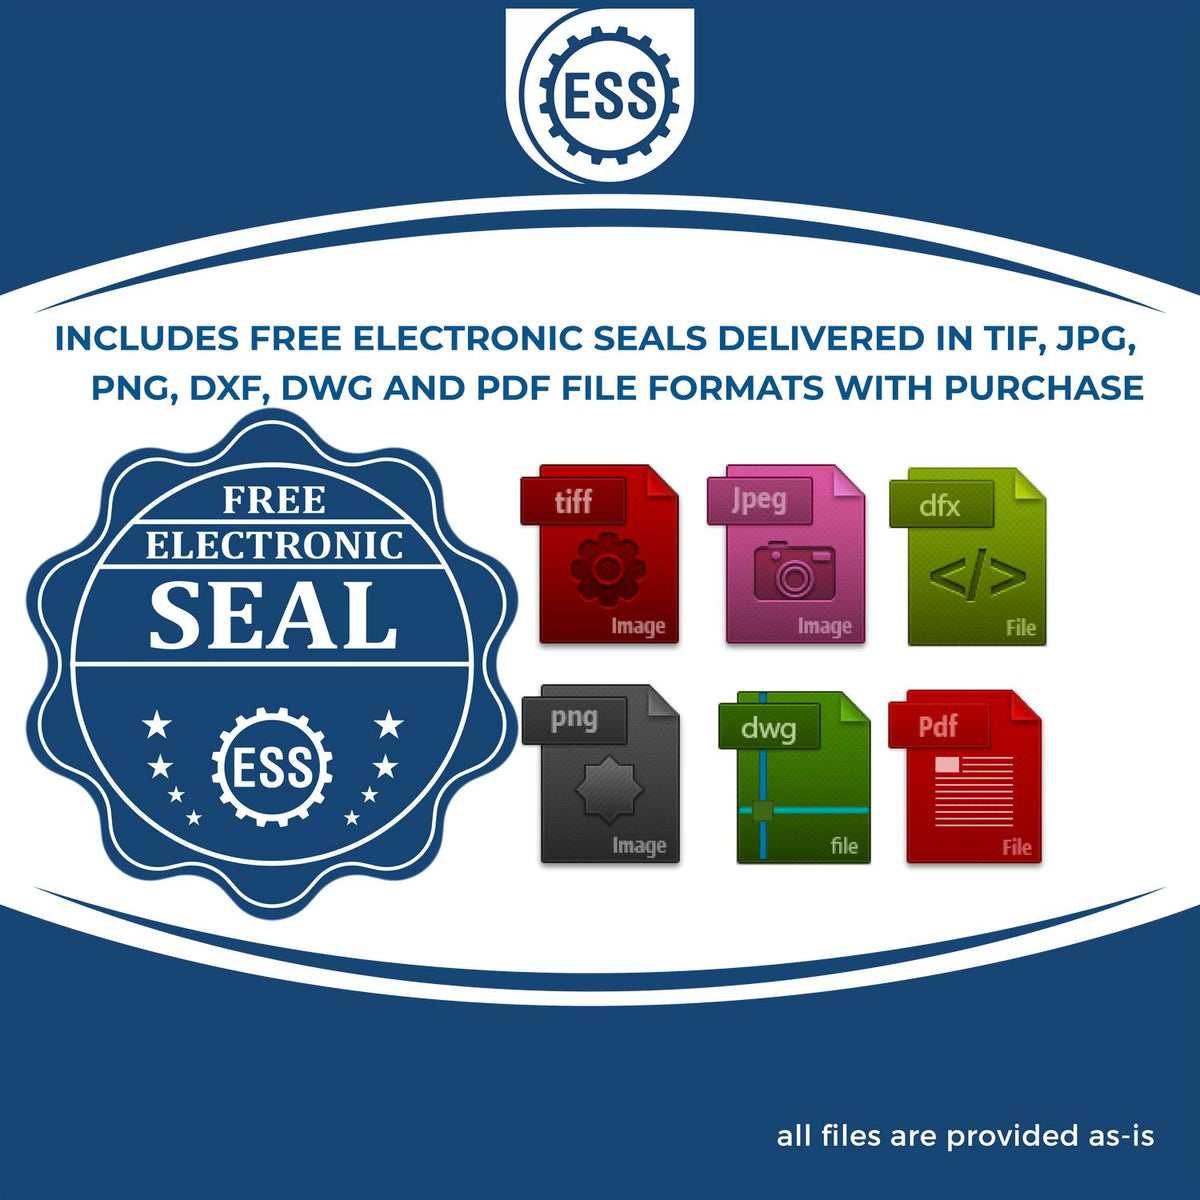 An infographic for the free electronic seal for the Extended Long Reach Idaho Surveyor Embosser illustrating the different file type icons such as DXF, DWG, TIF, JPG and PNG.